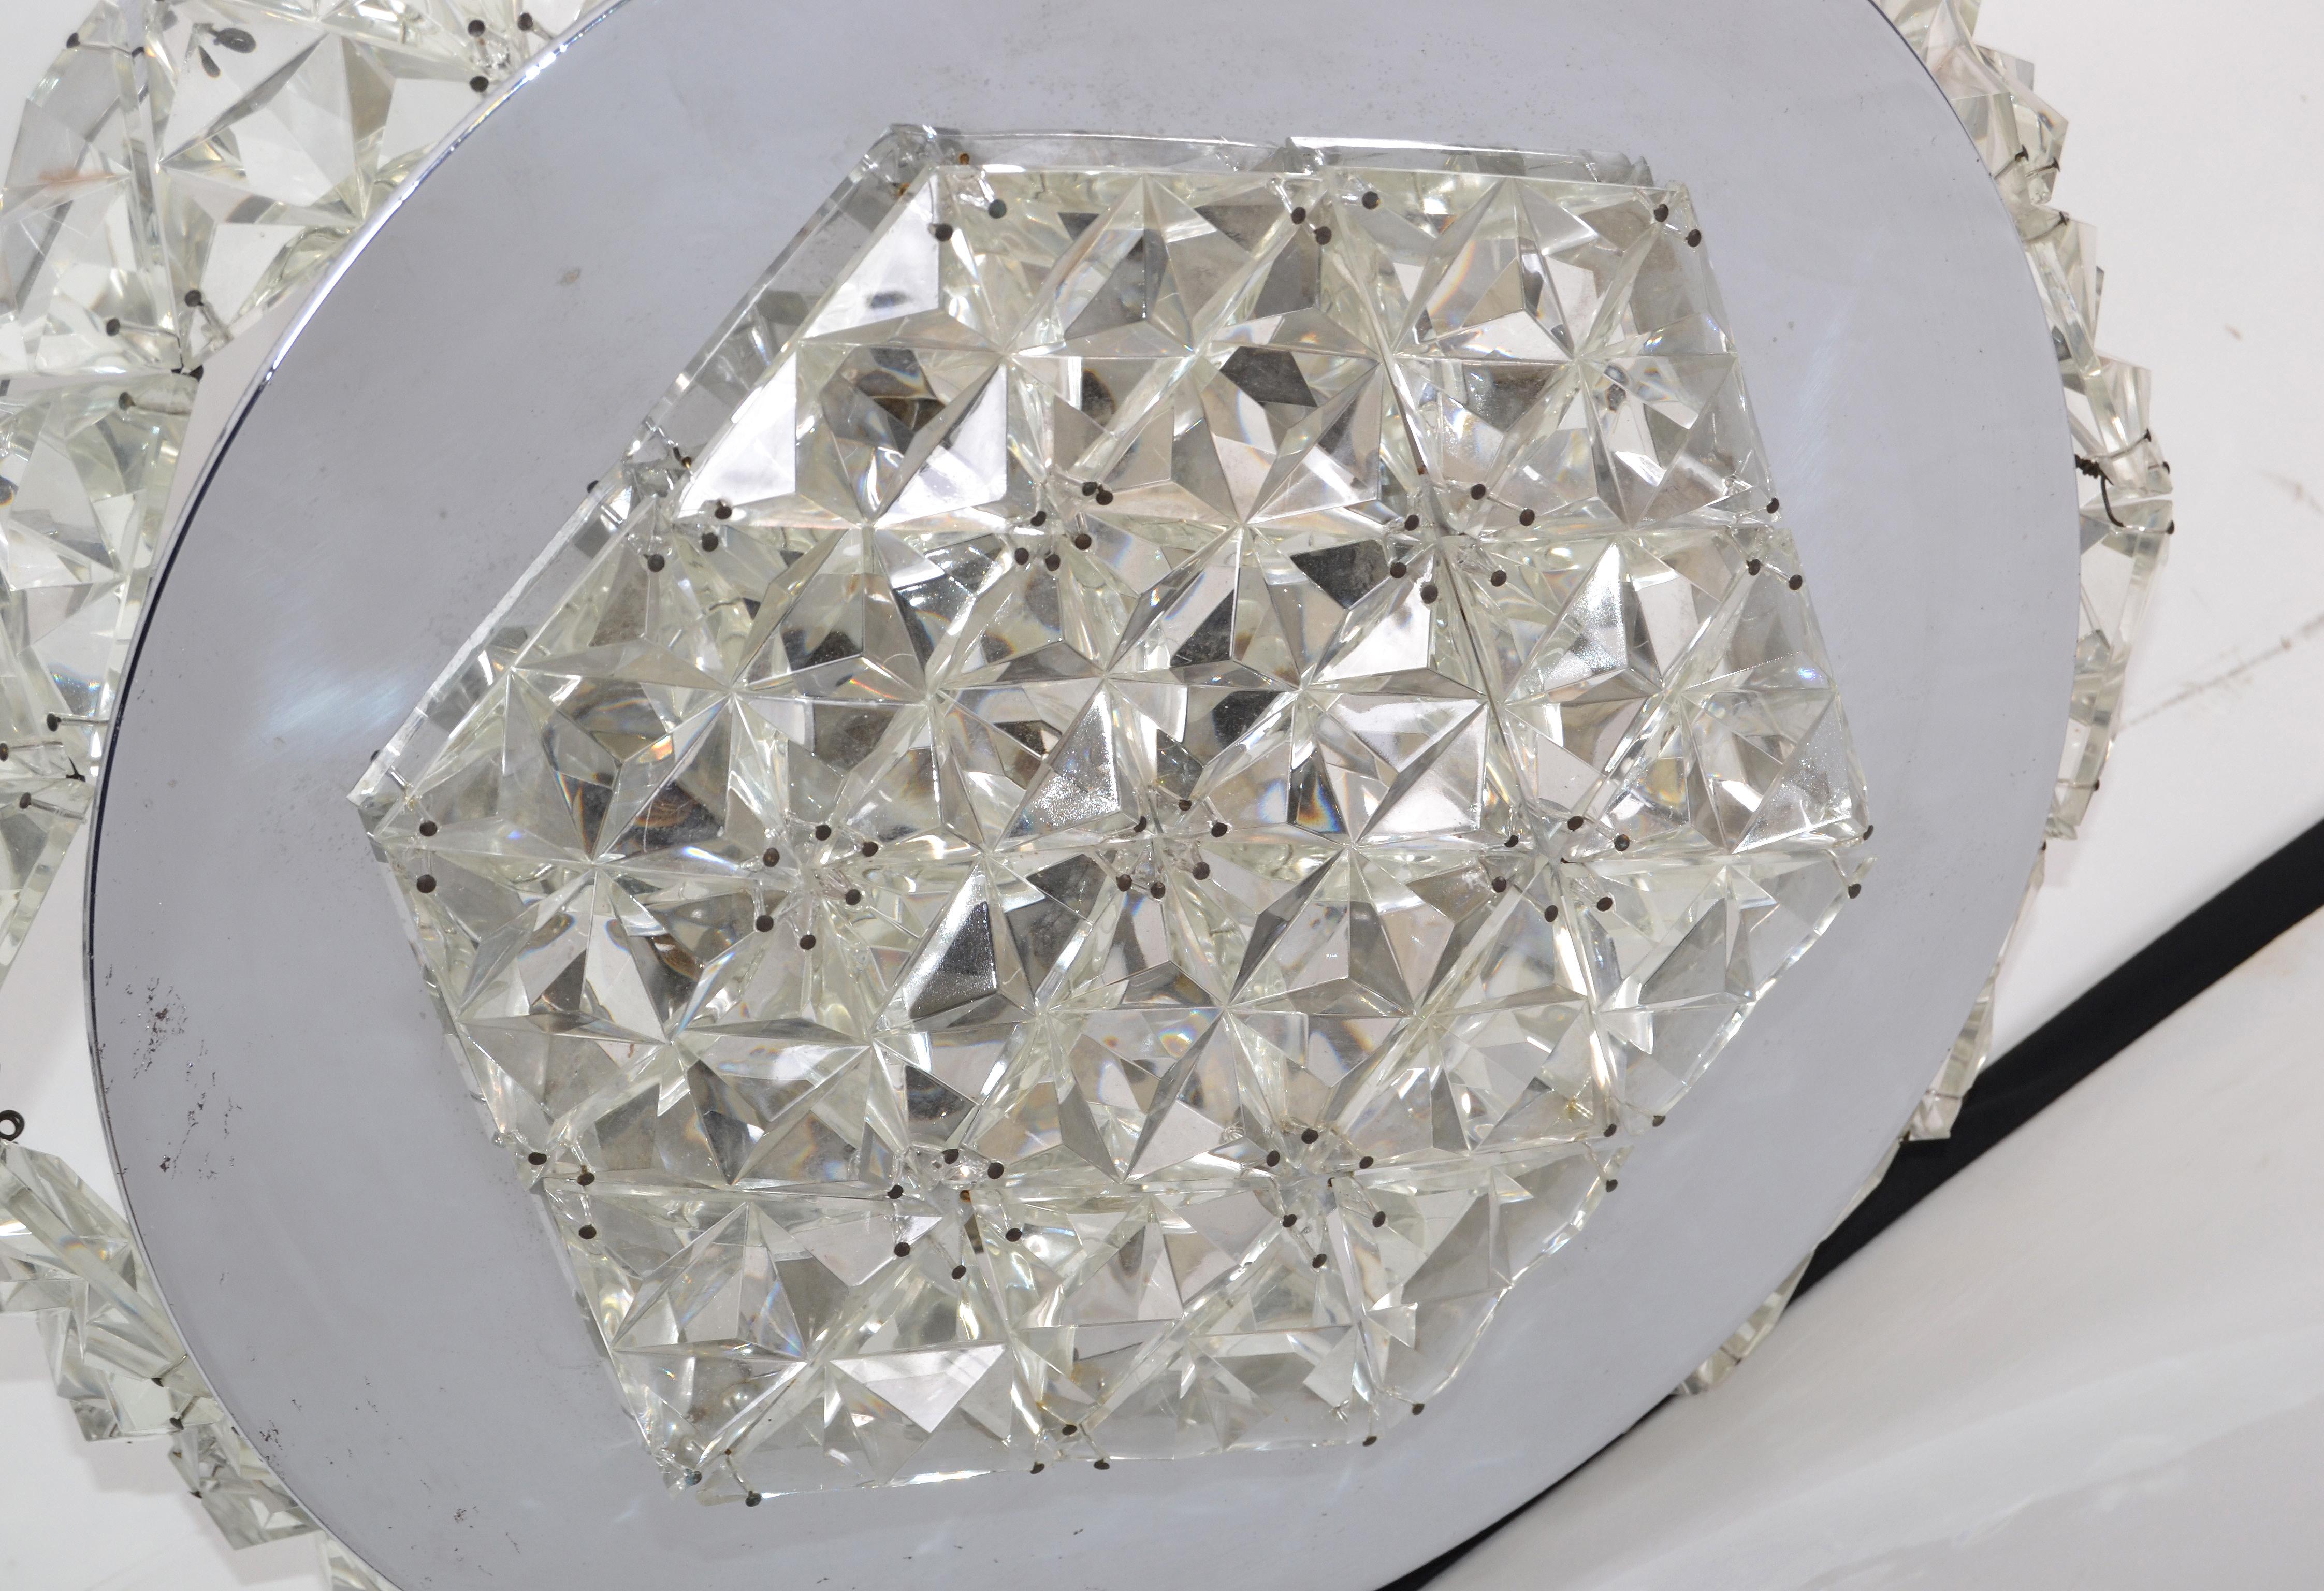 German Mid-Century Modern Chrome and Crystal Flushmount Ceiling Light Fixture, 1970s For Sale